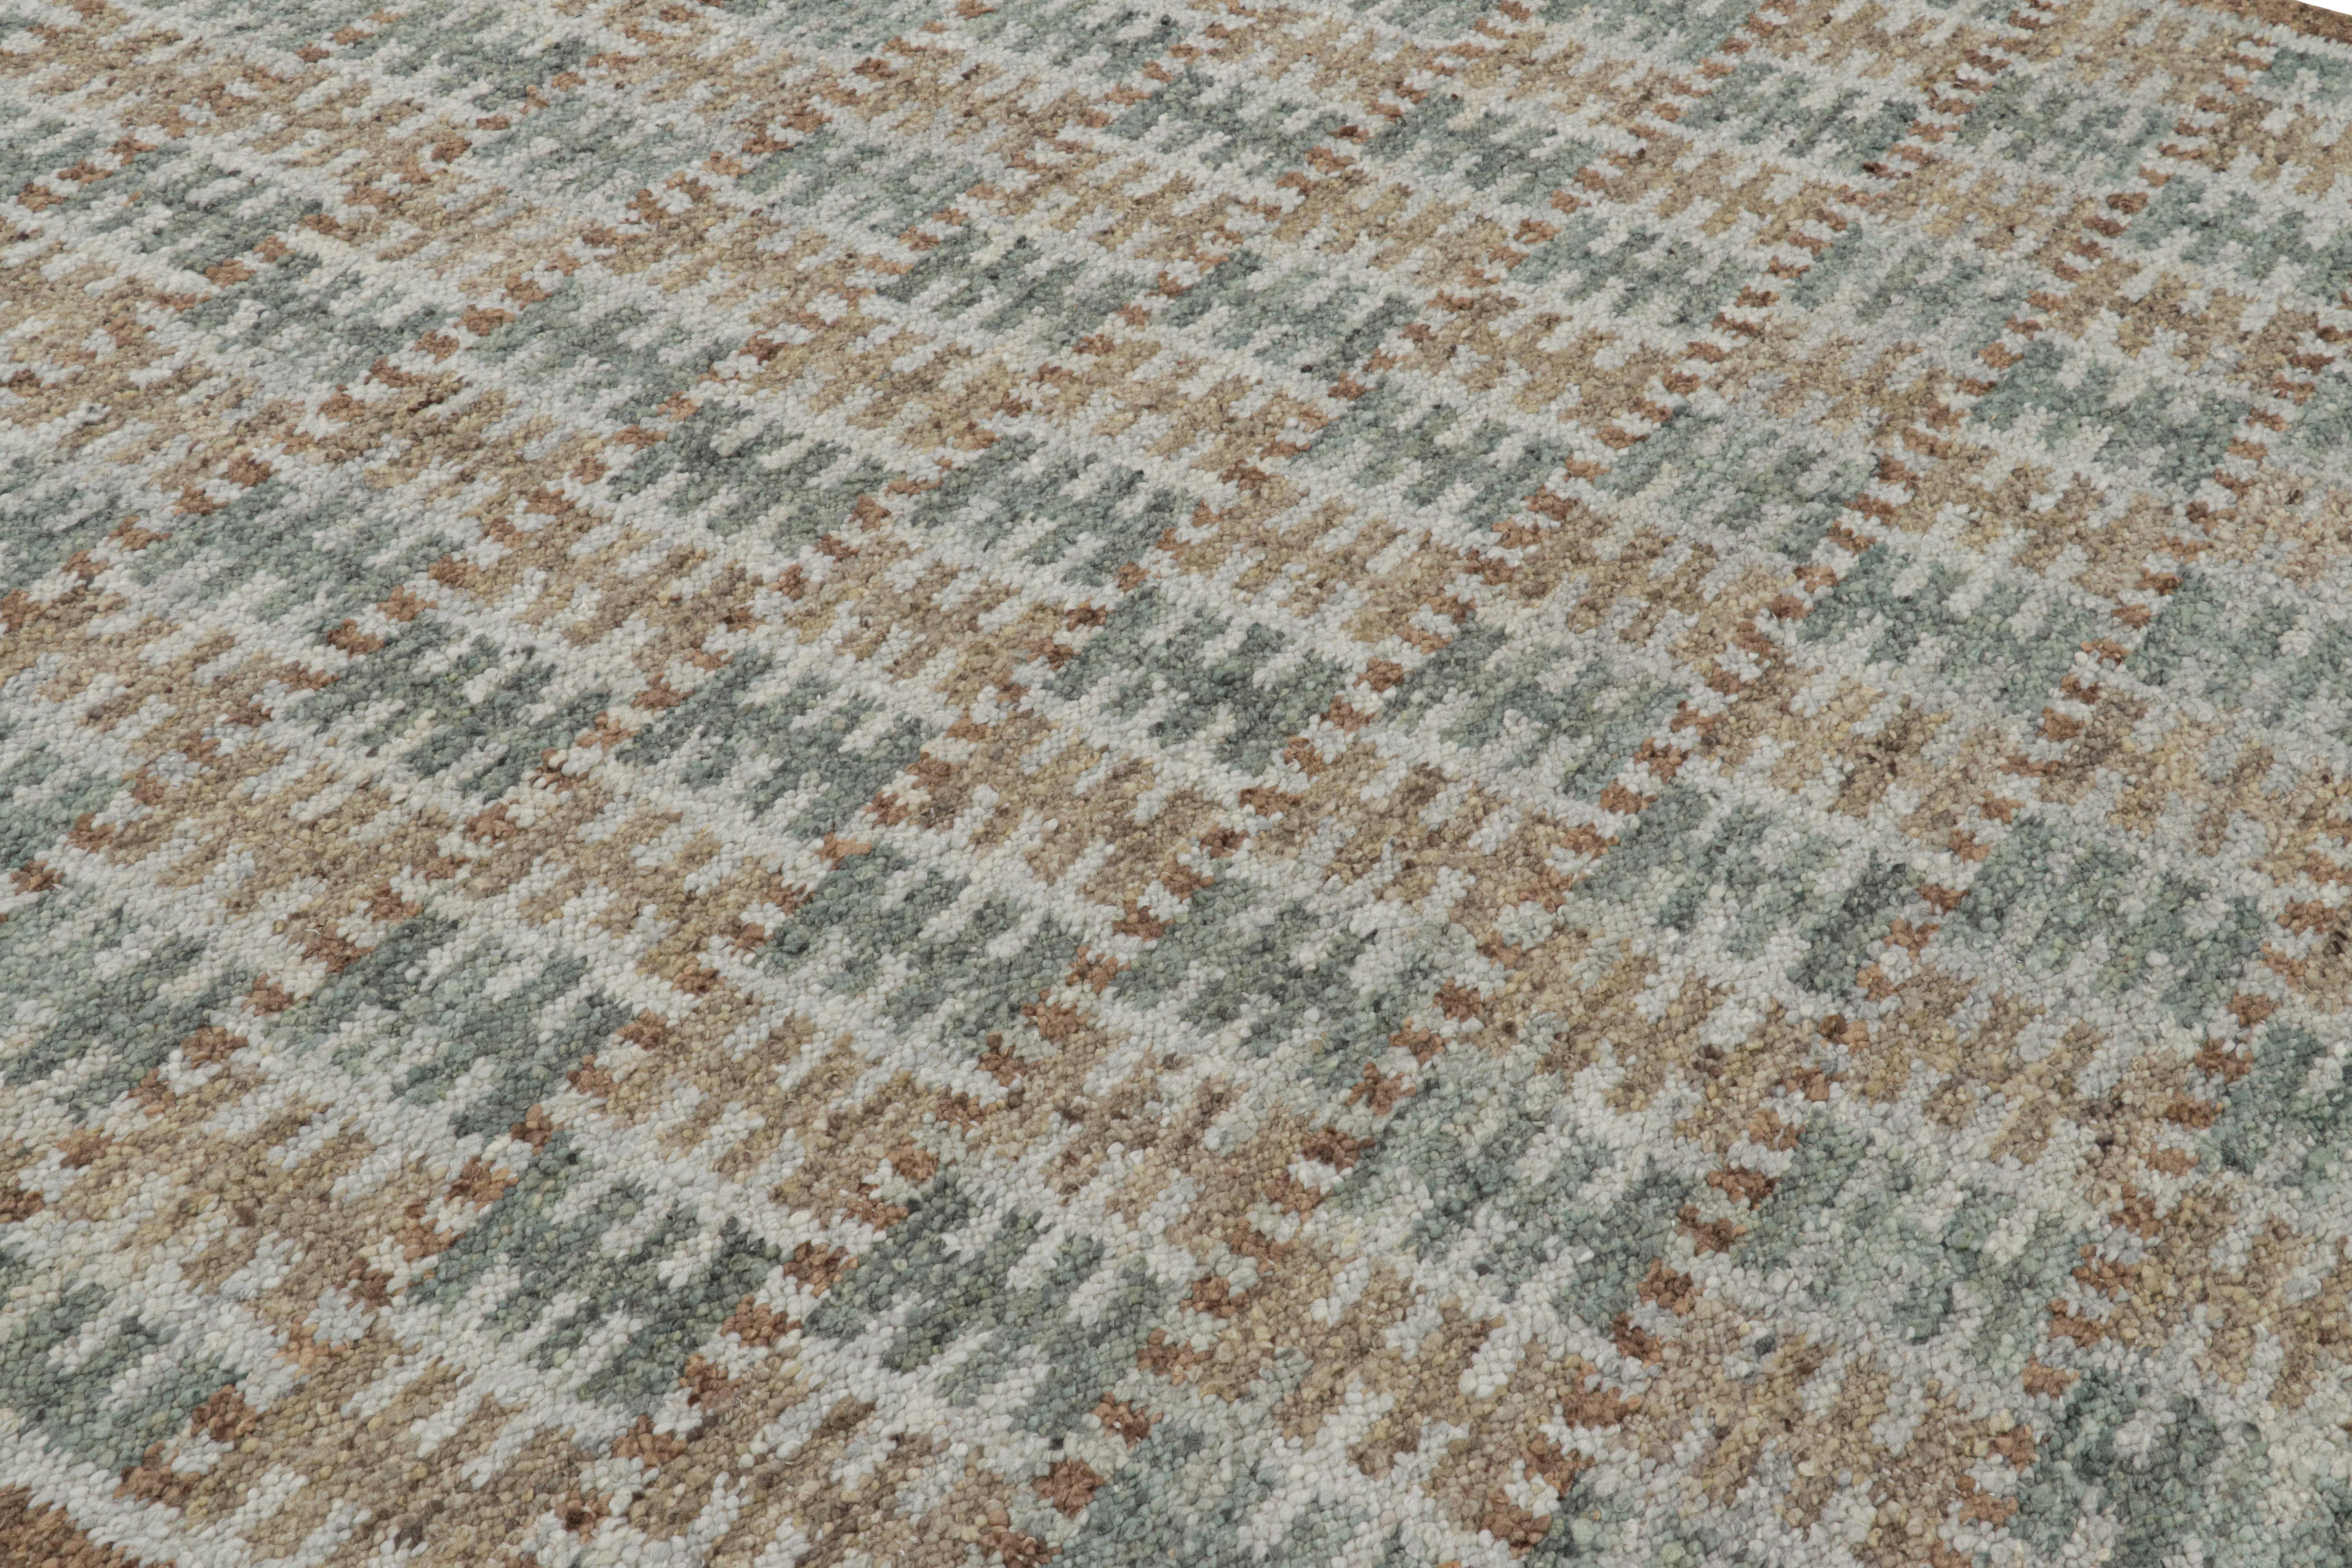 Handwoven in wool, this smart 8x10 Swedish style flat weave is Rug & Kilim’s “Nu” texture in their Scandinavian rug collection. 

On the design: 

Our “Nu” flat weave enjoys a boucle-like texture of blended yarns, and a look both impressionistic and